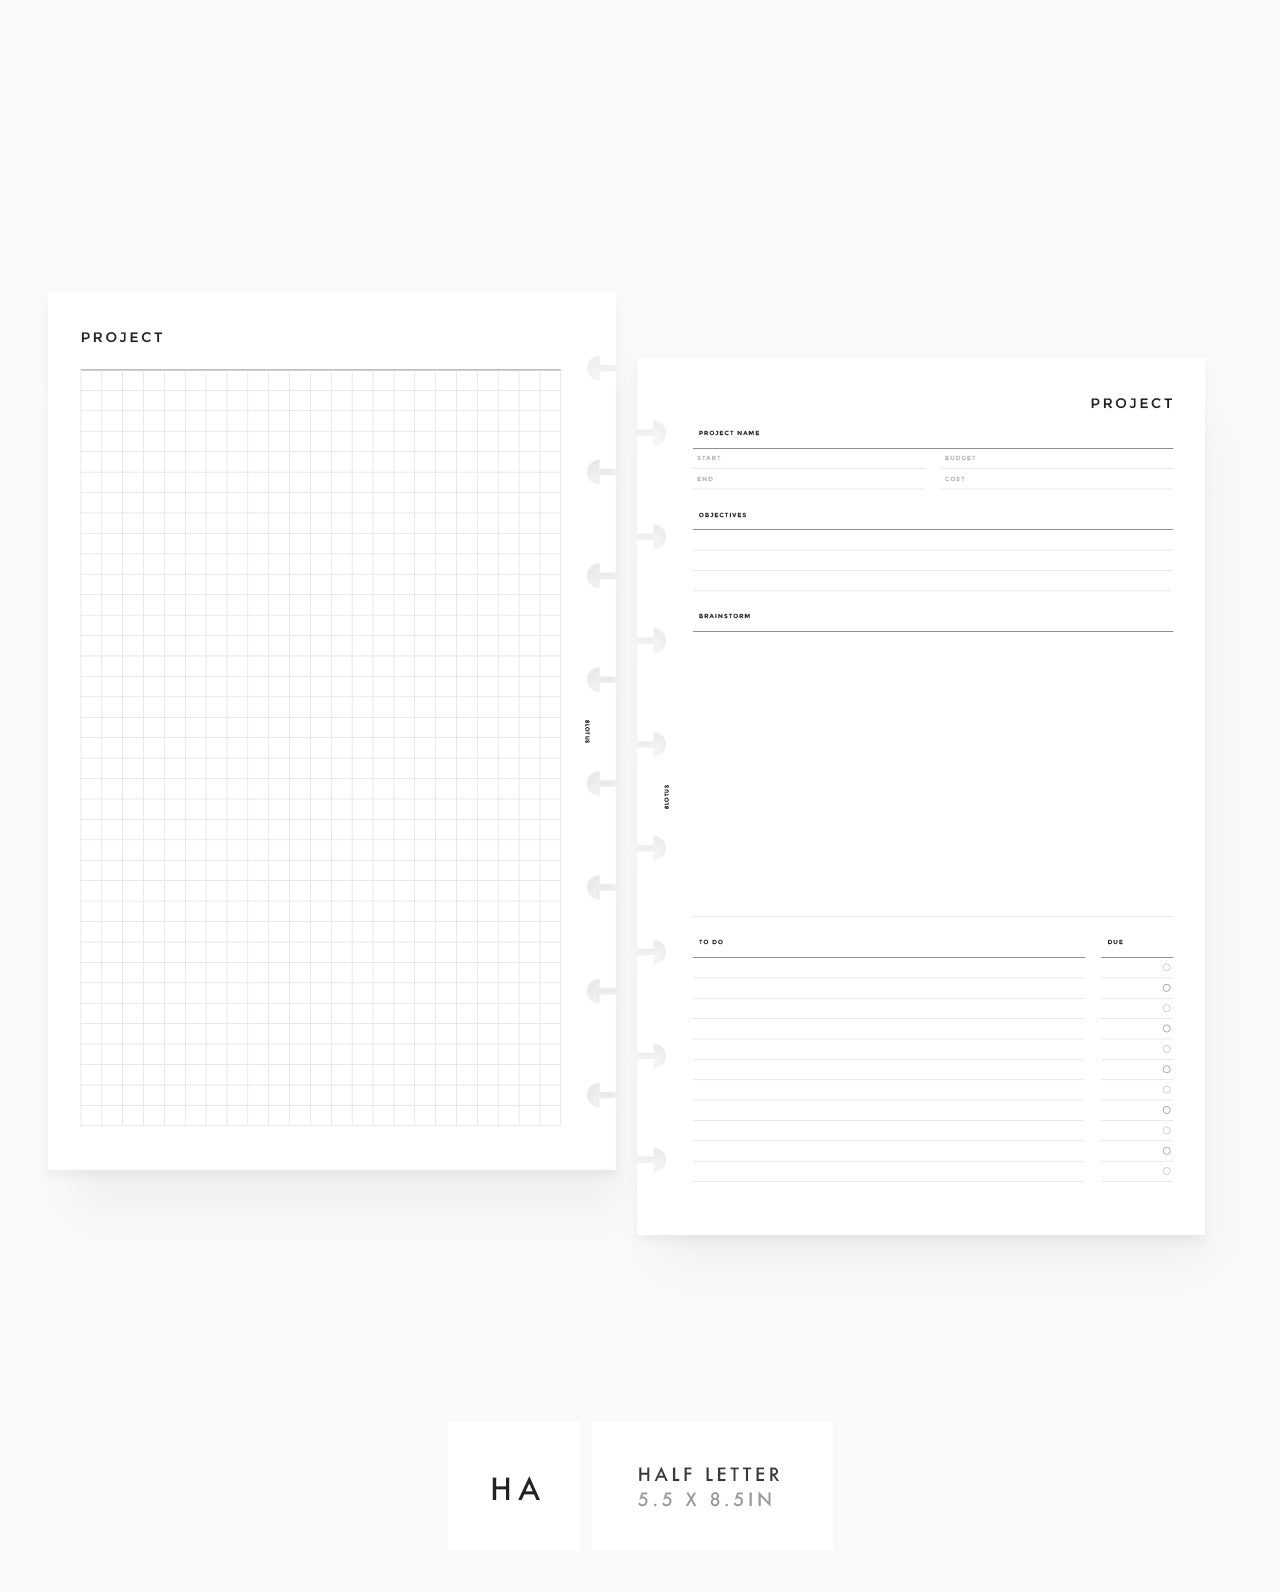 MN020 - Project Planner - PDF